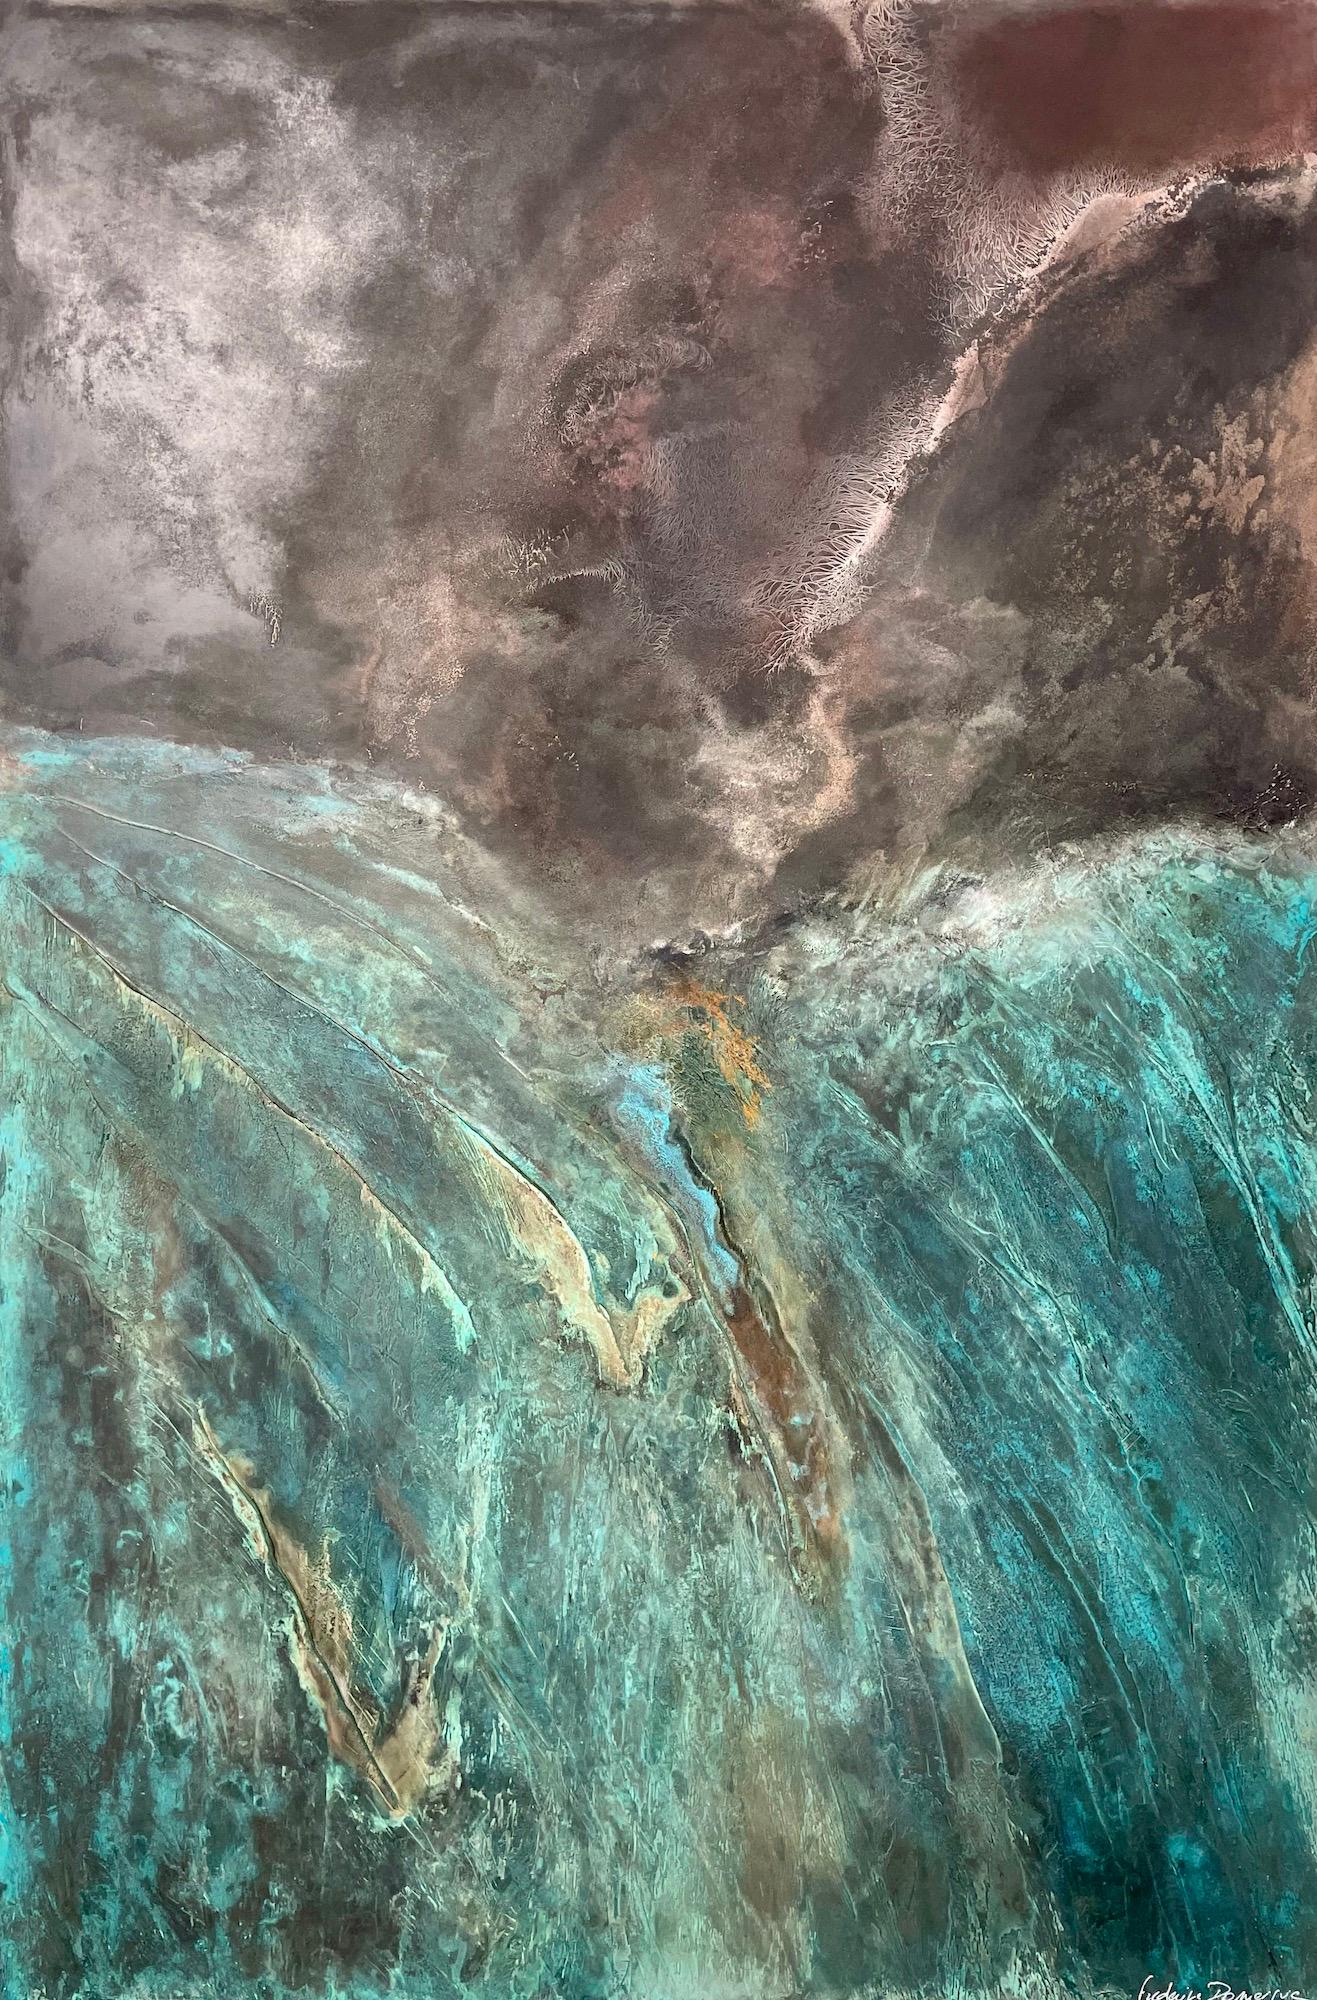 Confluences II is a unique painting by French contemporary artist Frédérique Domergue. This painting is made with oxidized zinc and bronze leaves on aluminium, patina fixed with beeswax, dimensions are 150 × 100 cm (59.1 × 39.4 in).
The artwork is